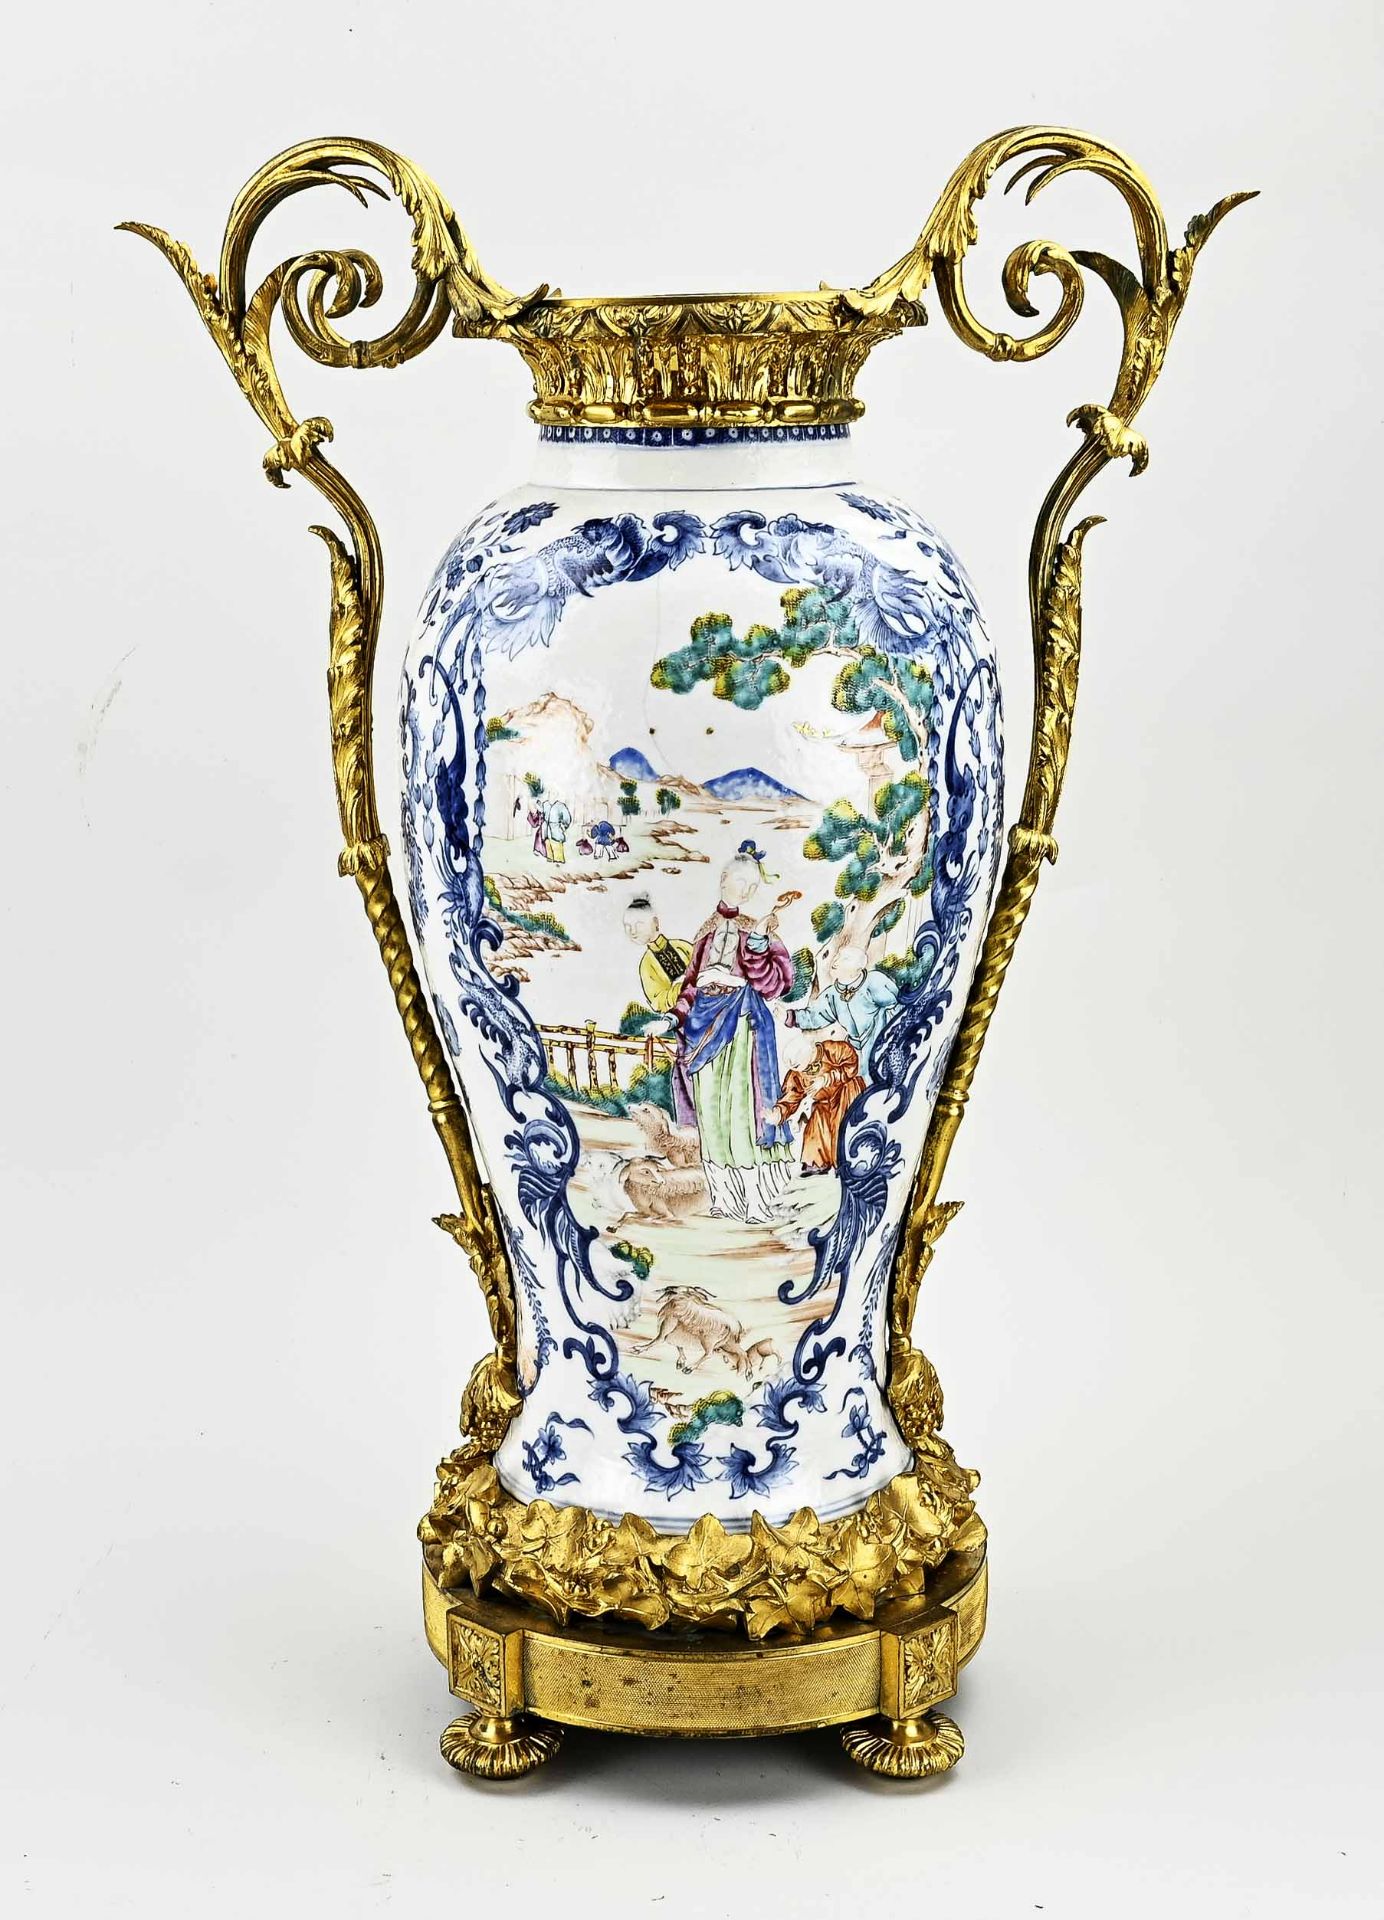 Capital 18th century Chinese Queng Lung vase, H 55 cm. - Image 2 of 3